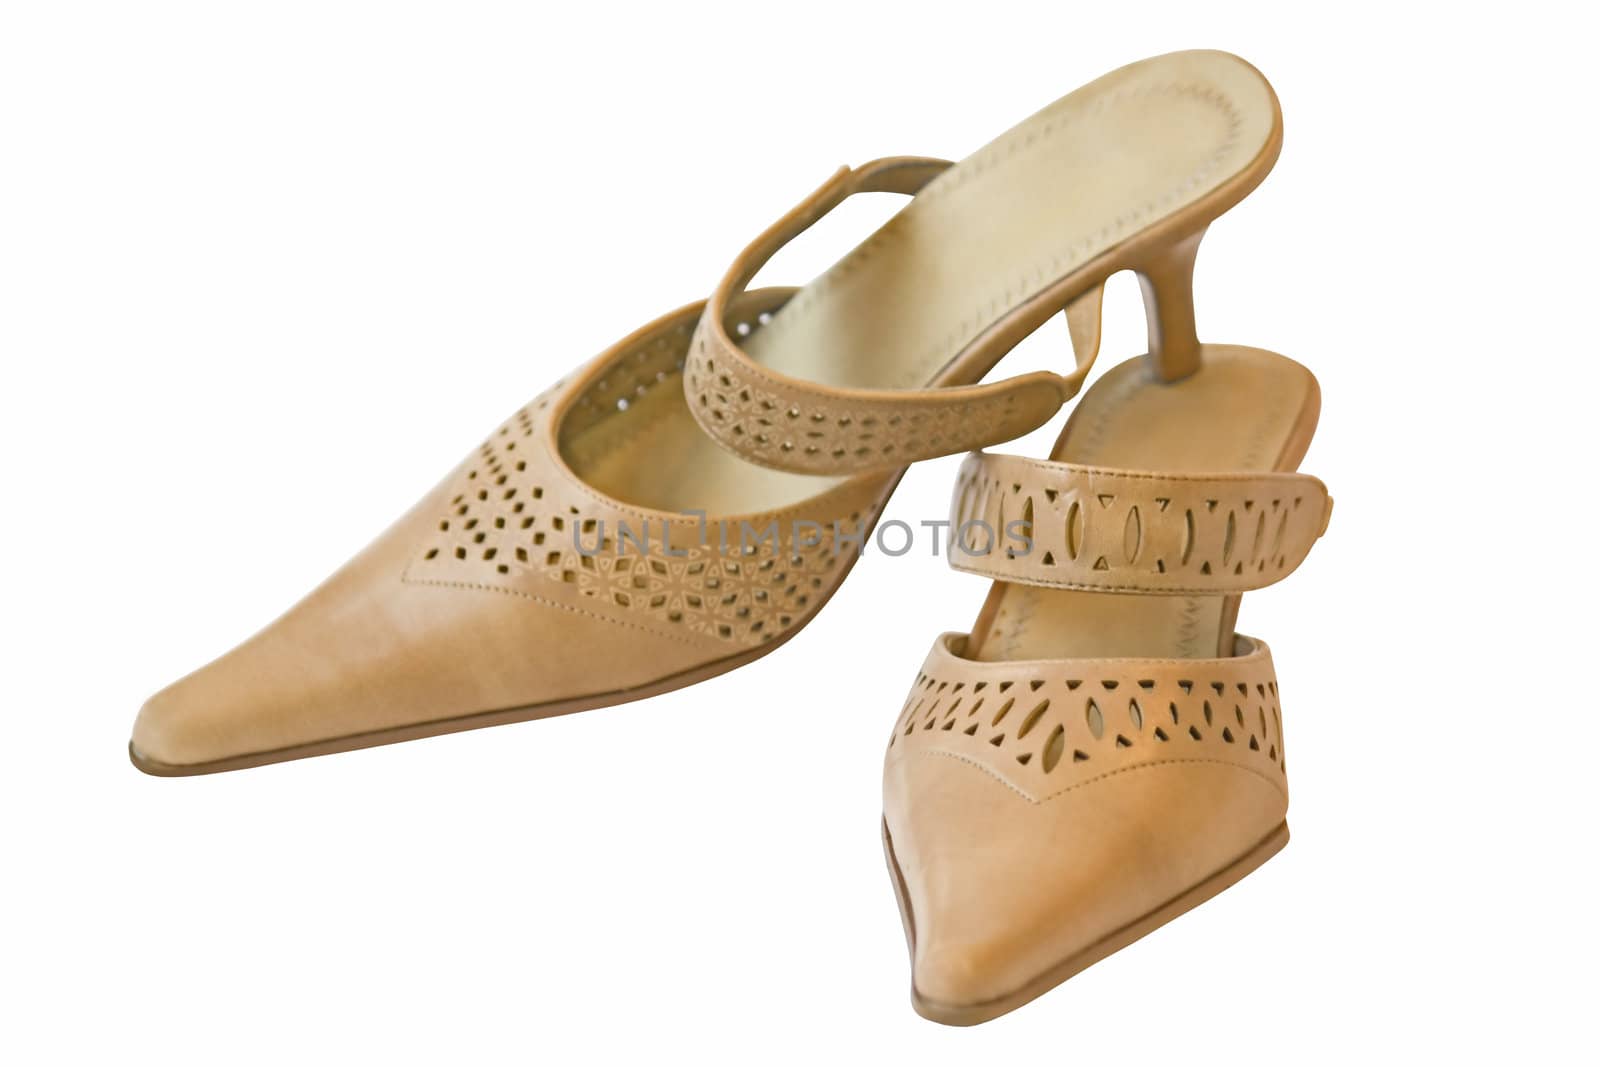 Brown women's shoes on the high heel, isolated on a white background.